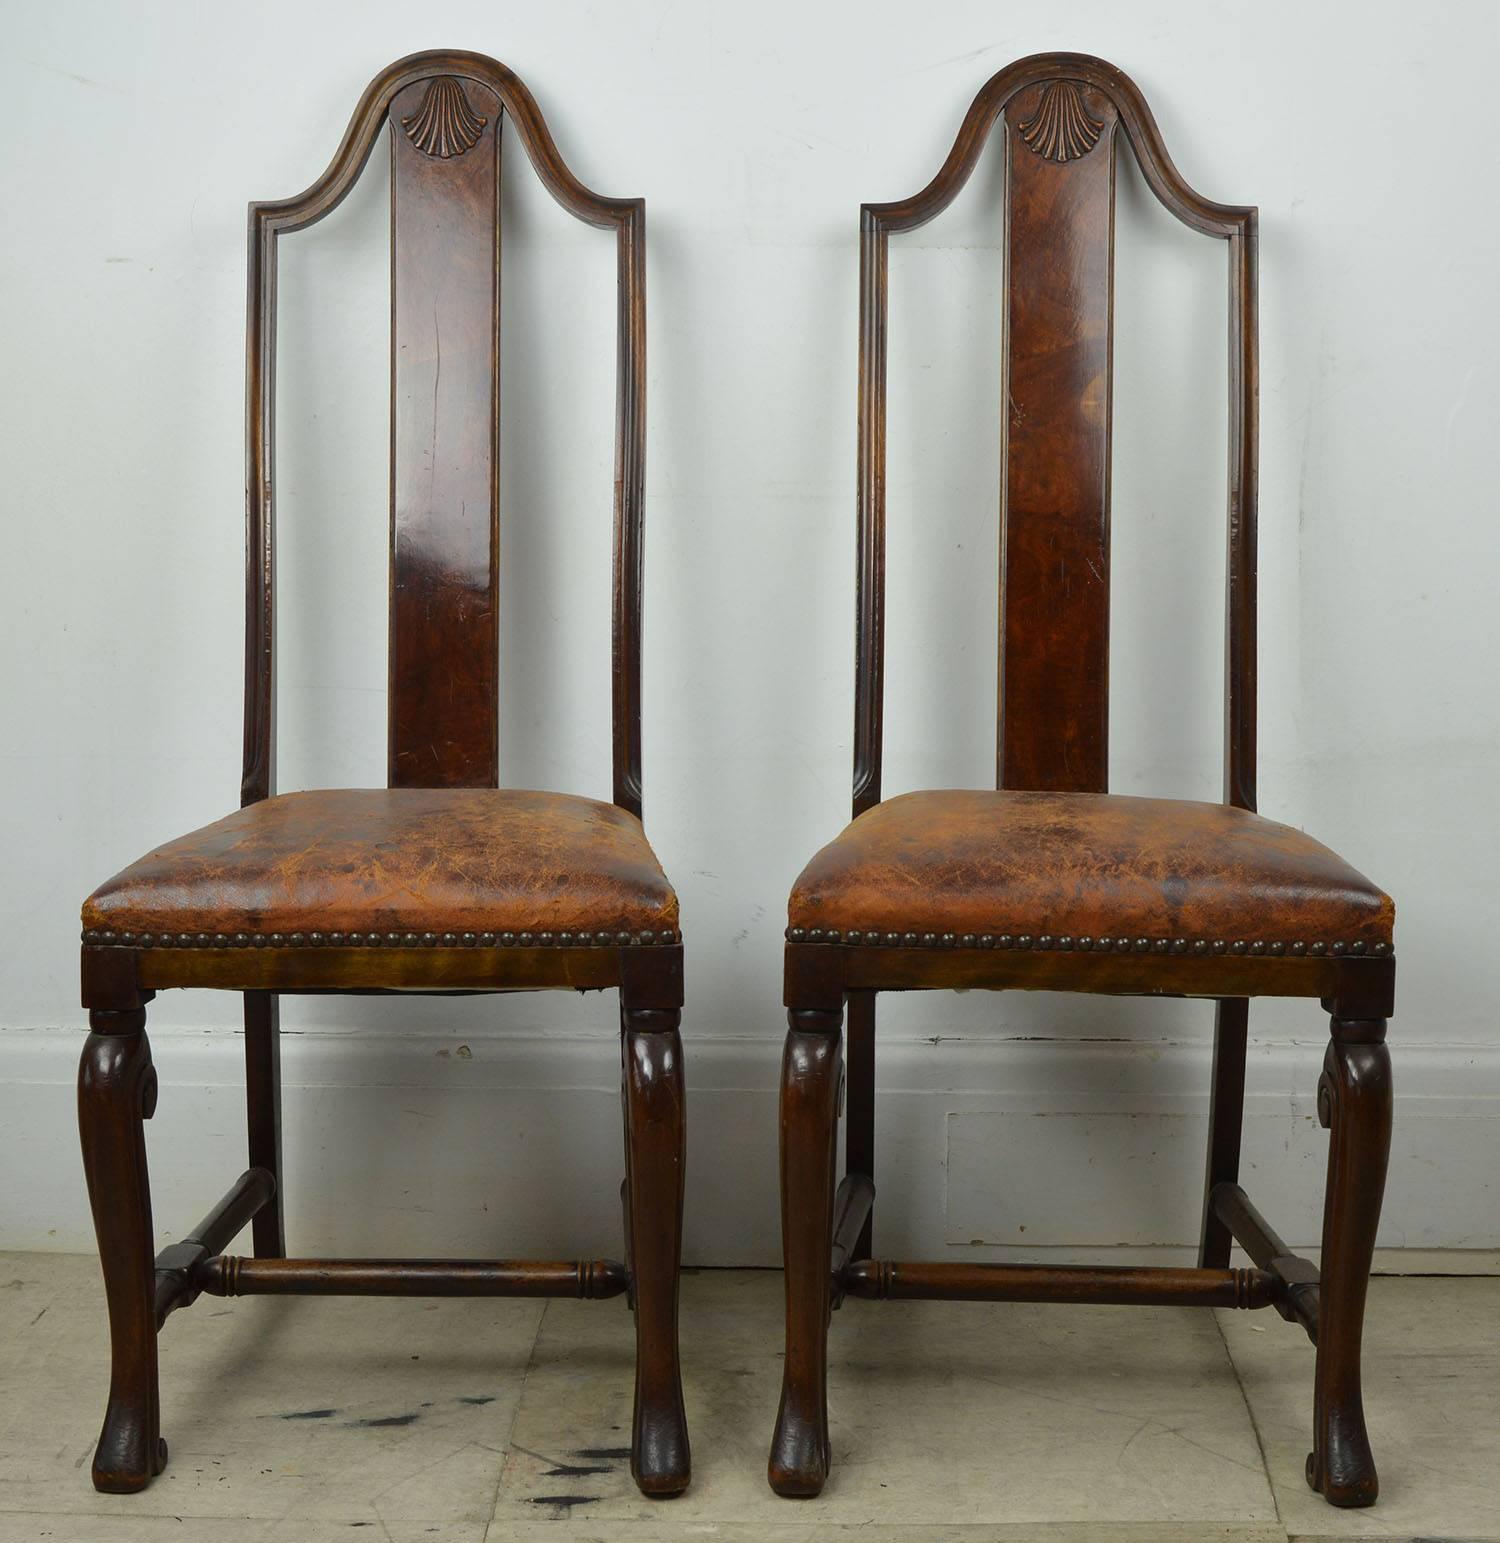 Great pair of walnut side or hall chairs in Baroque style.

Fabulous colour of wood and leather.

Finely carved shell detail on the top of the burl walnut splats.

Also a lovely ammonite shaped carved detail on the top of the front legs.

Original